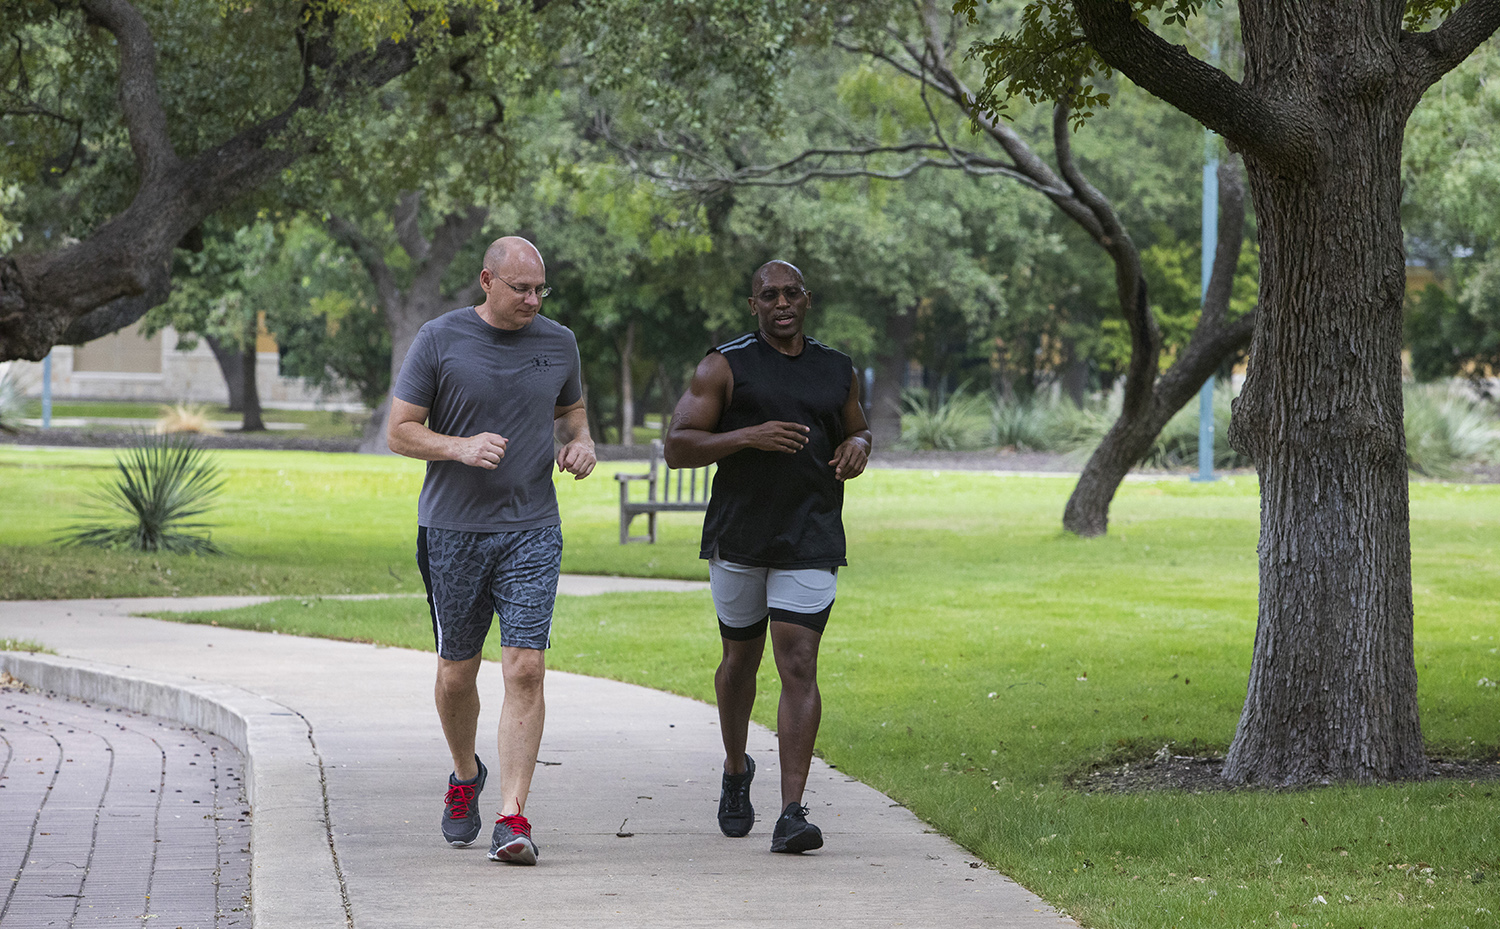 Two Valero employees jogging on a path